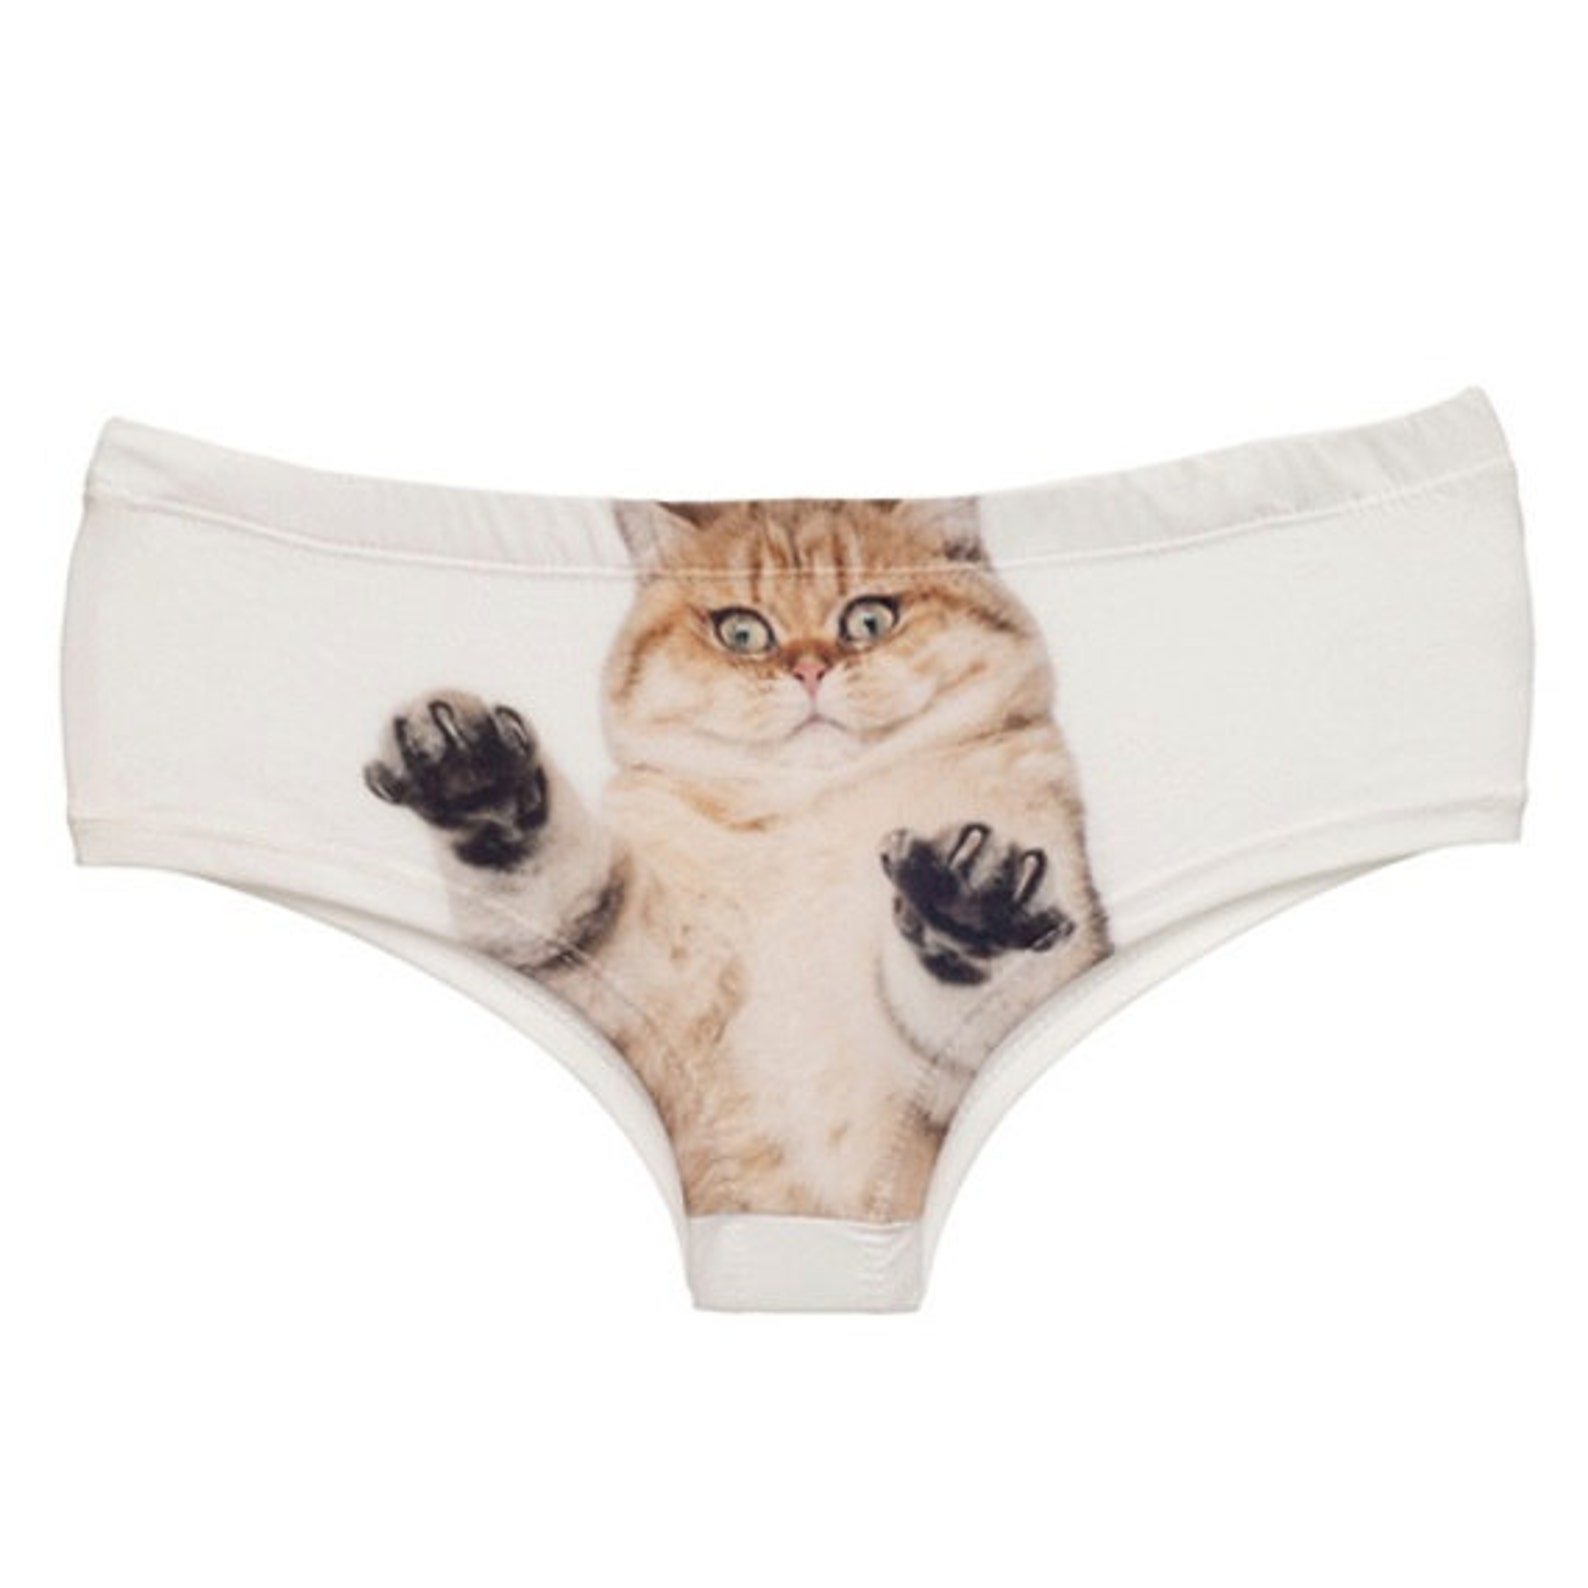 Scary Cat Panties Pussy Cat Underwear Hipster Panties Style Etsy